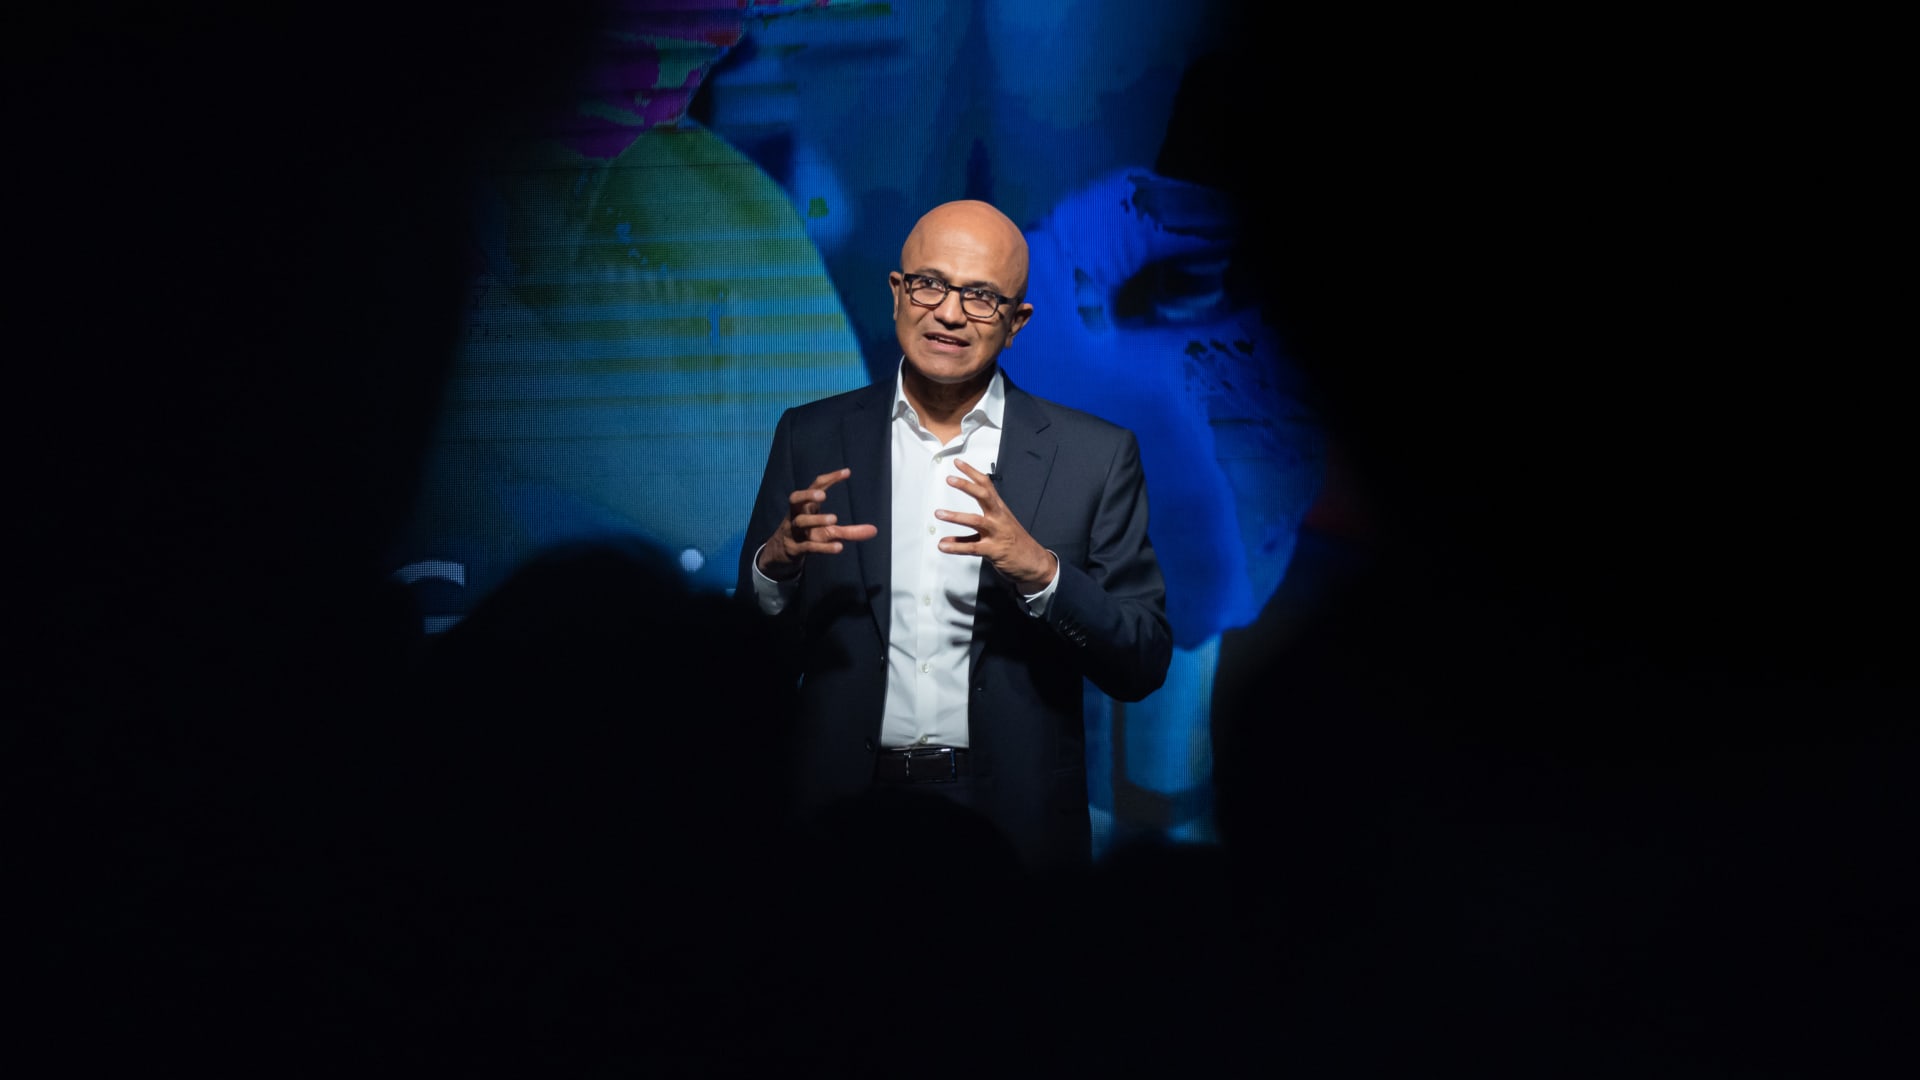 Microsoft is laying off 10,000 employees